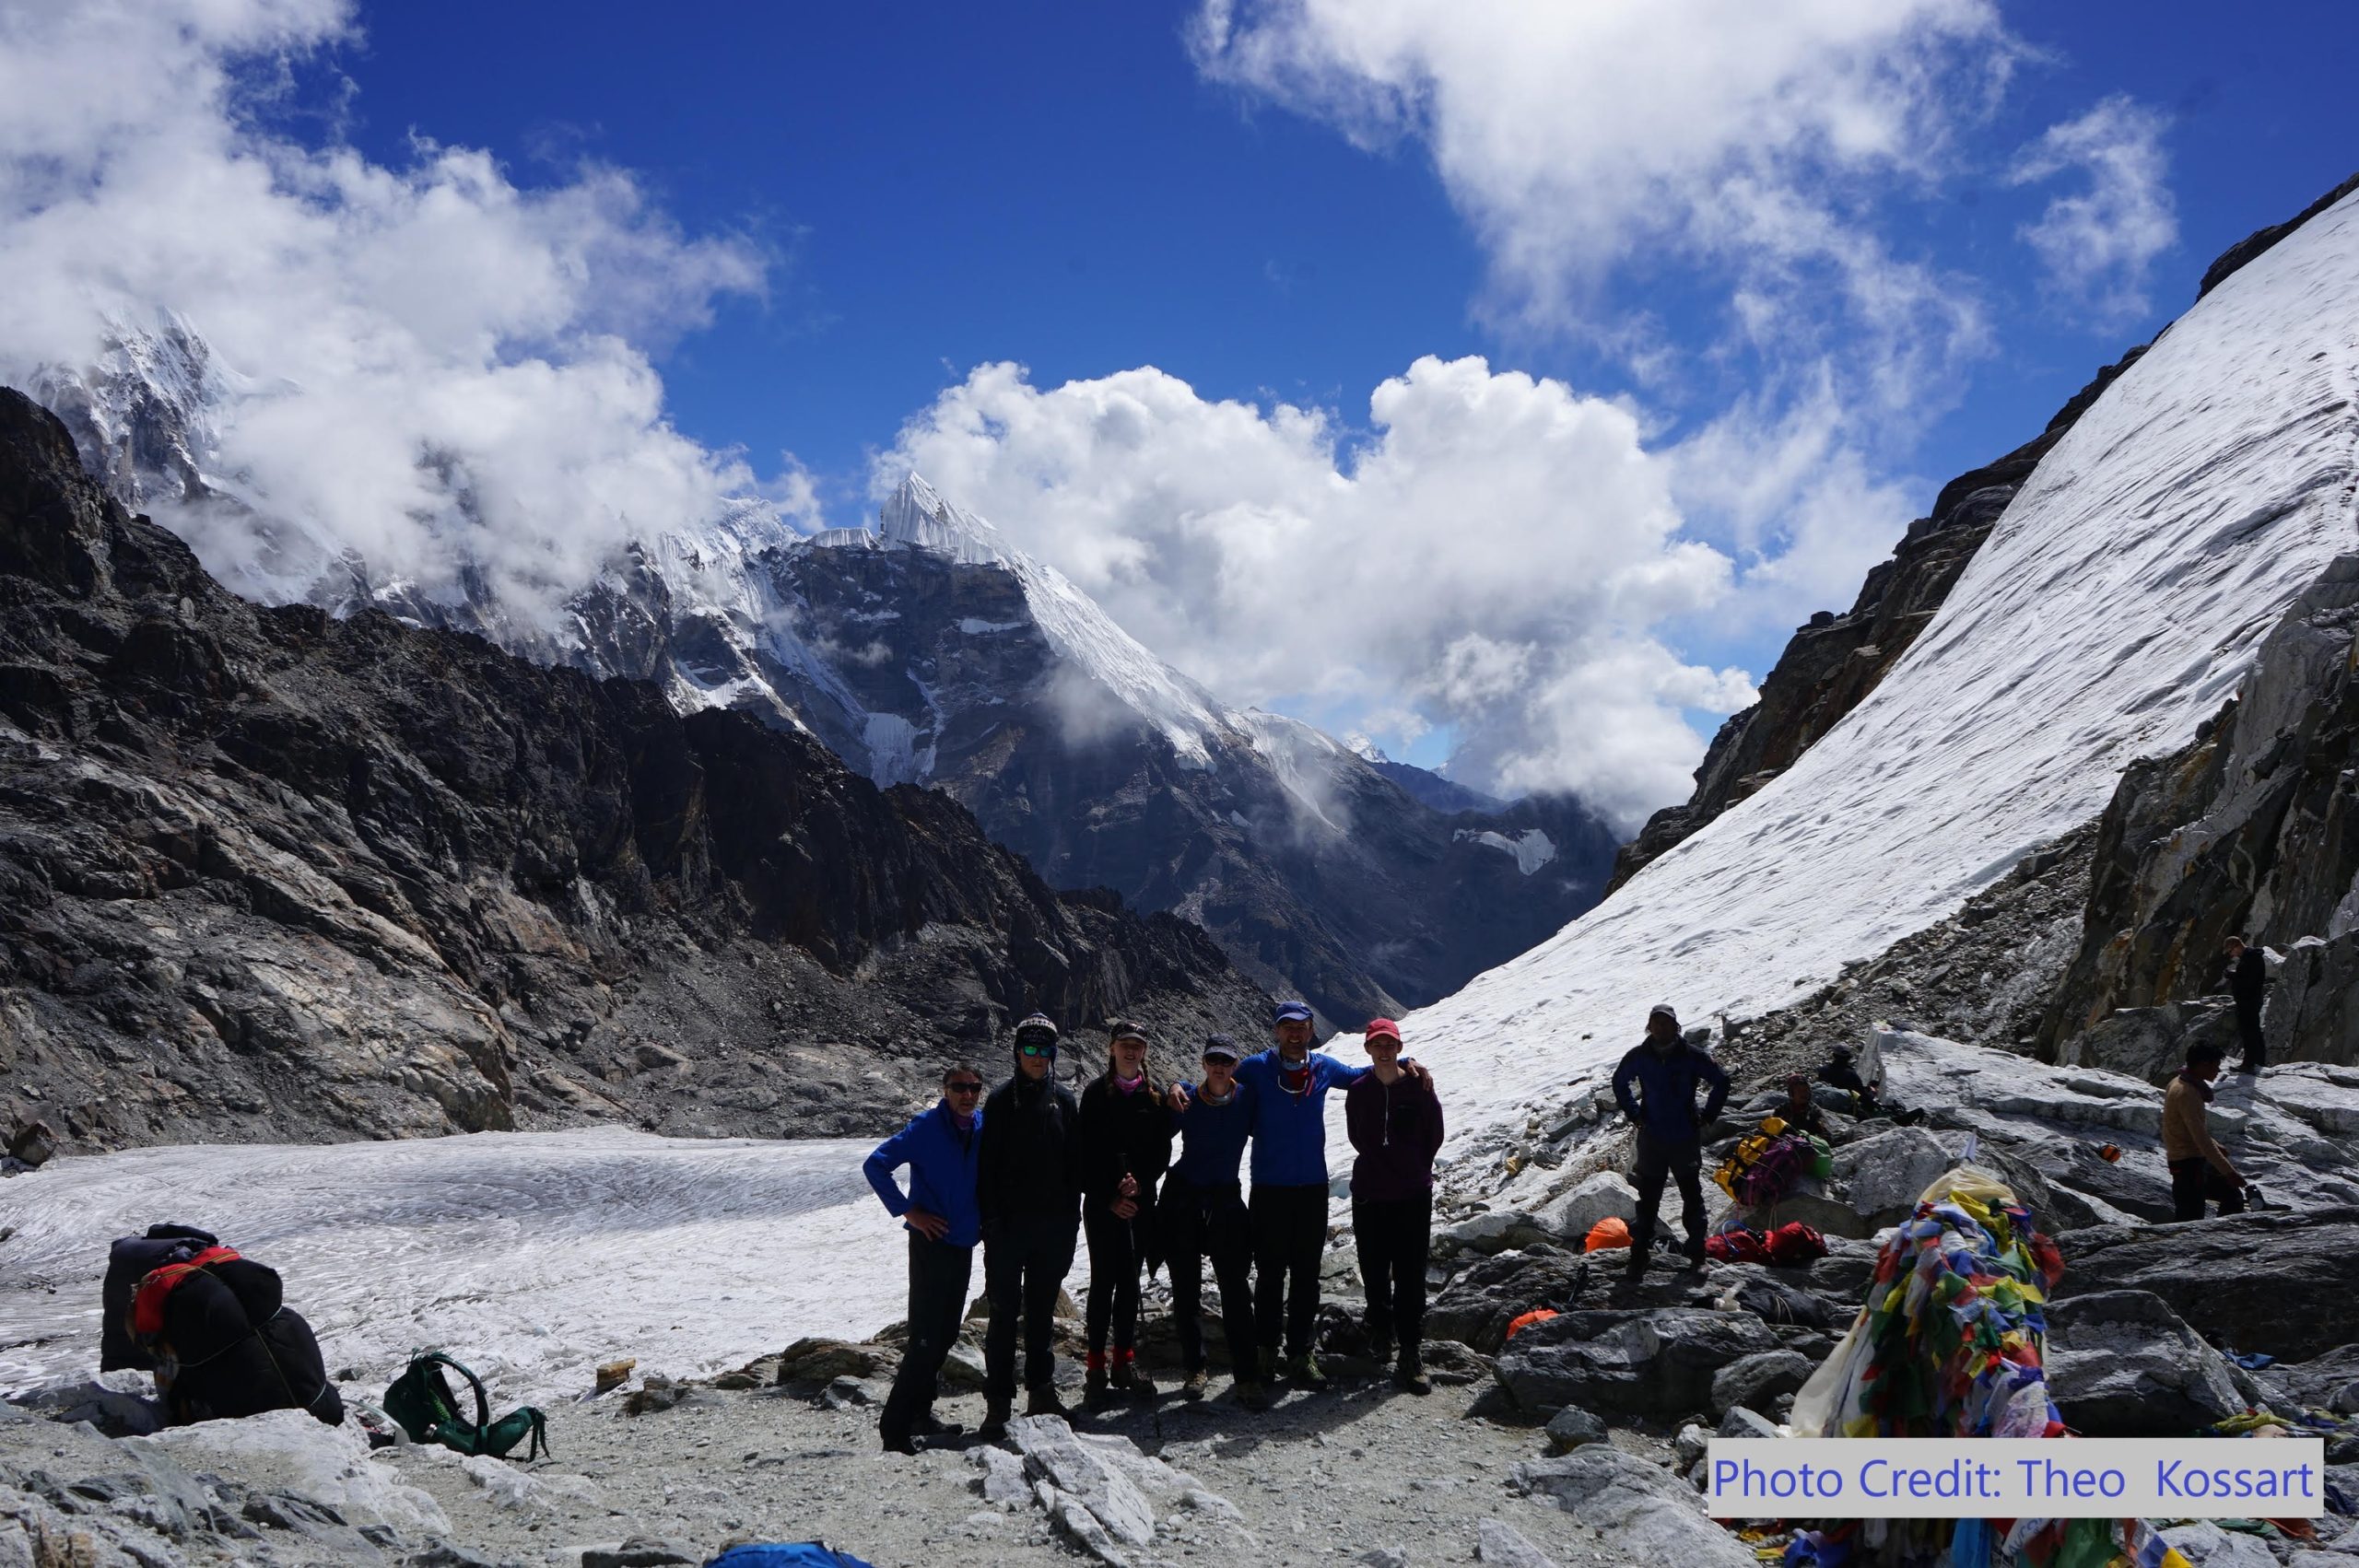 Family Trek in Nepal: Explore, Experience, and Exhilarate with your loved ones.